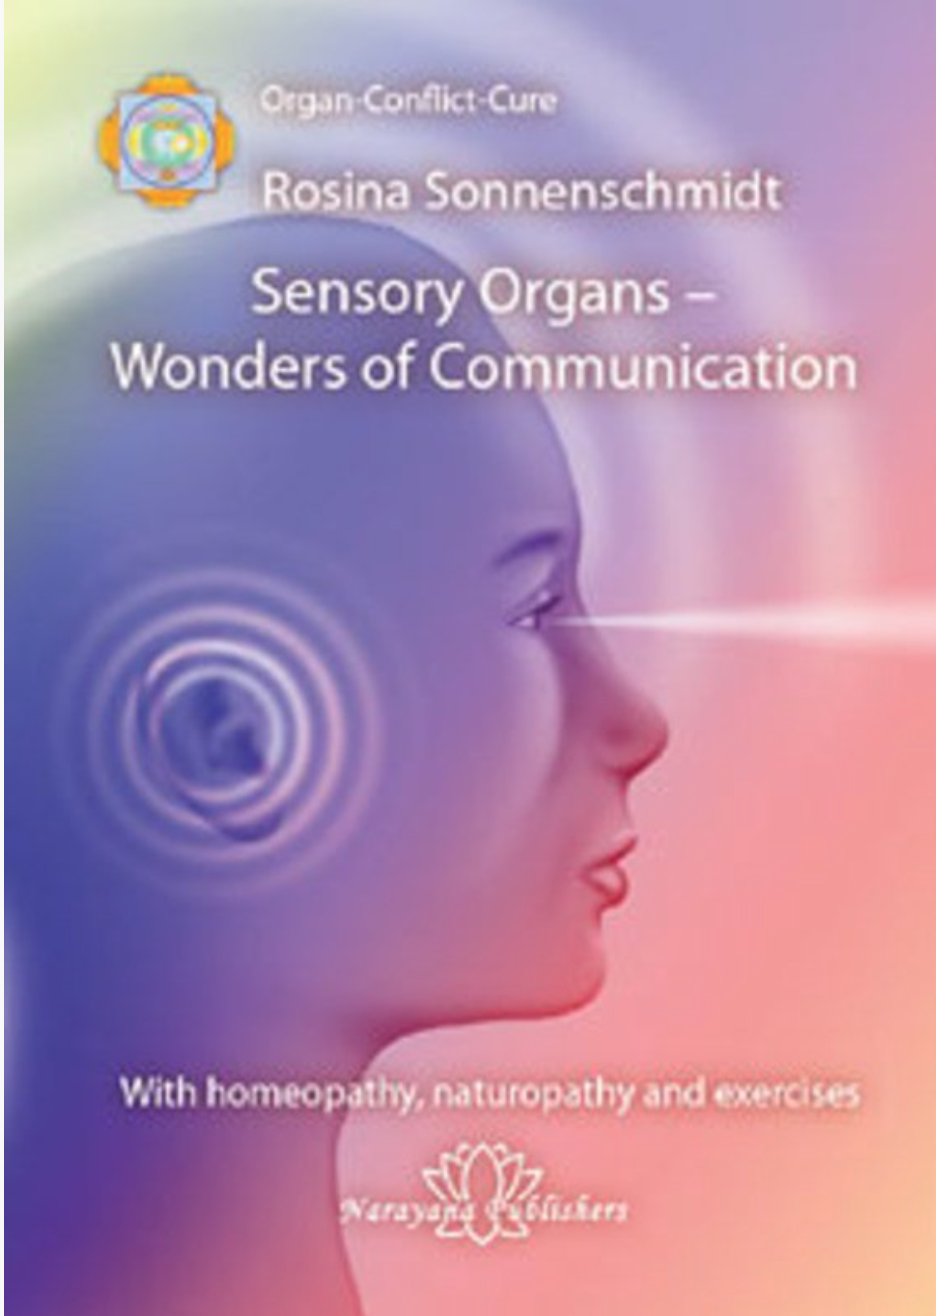 Sensory Organs - Wonders of communication with homeopathy, naturopathy and exercises (Sonnenschmidt) New